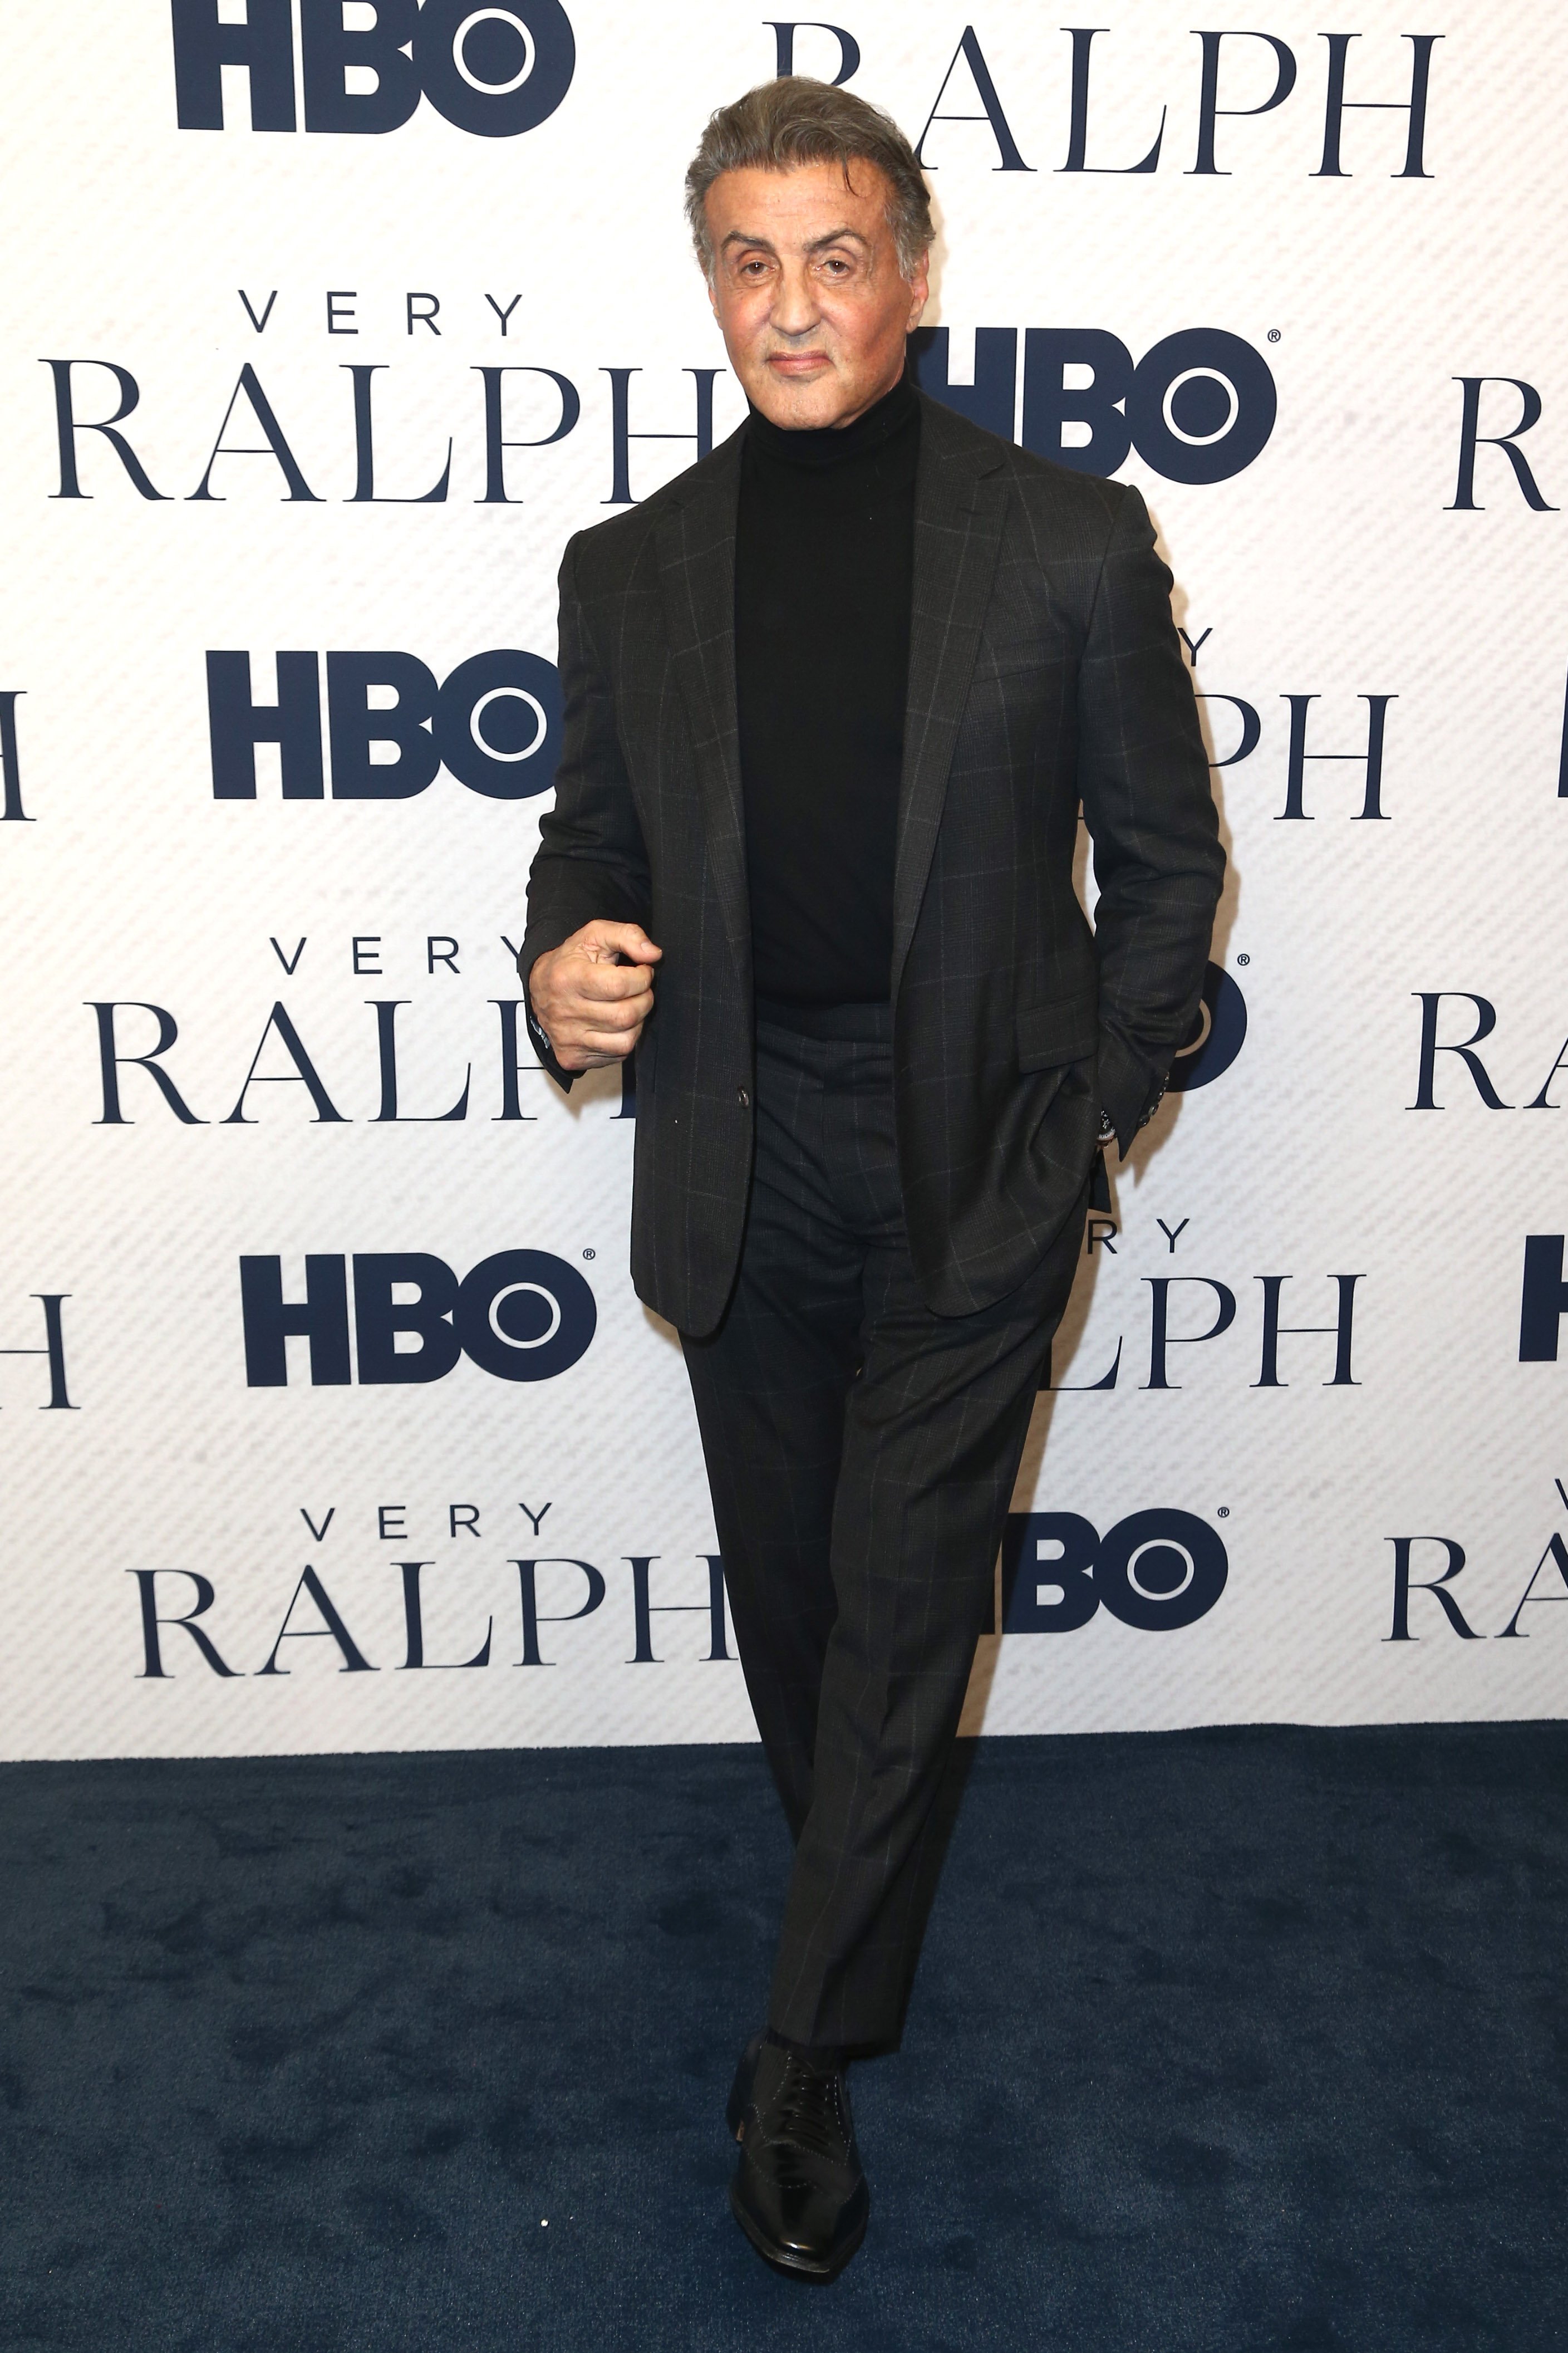 Sylvester Stallone attends the premiere of "Very Ralph" in Beverly Hills California on November 11, 2019 | Photo: Getty Images